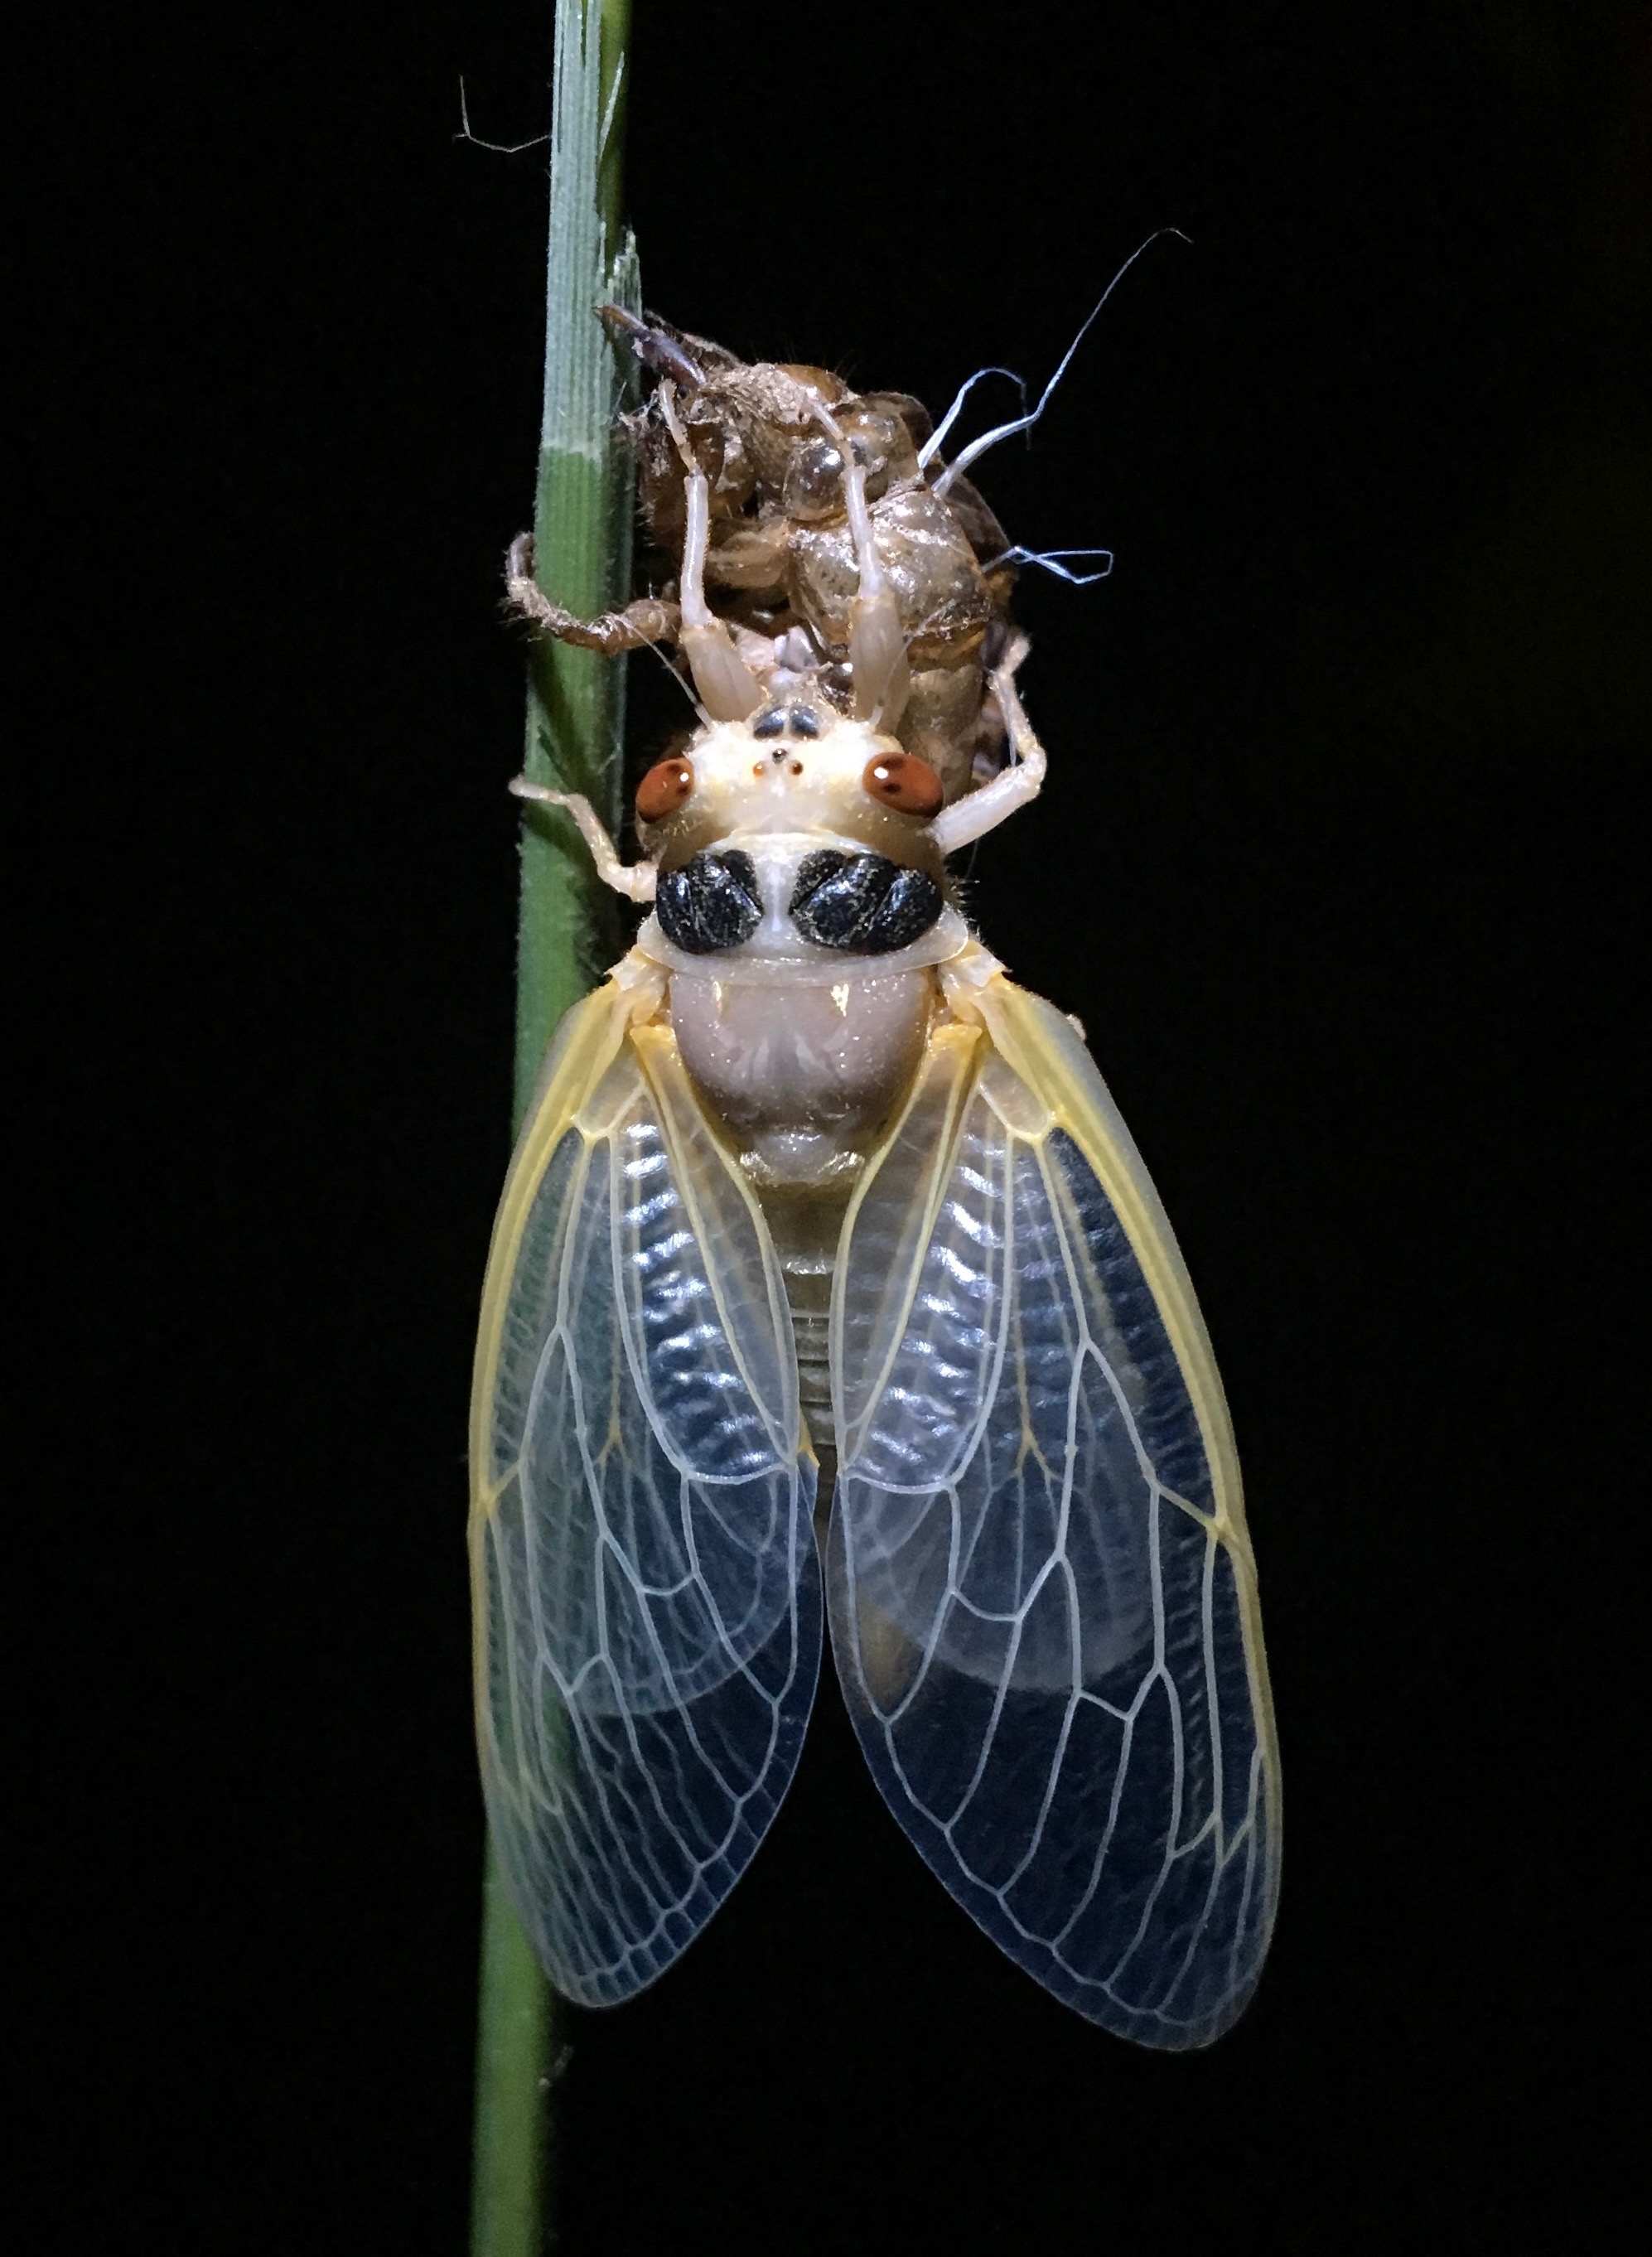 teneral stage adult cicada